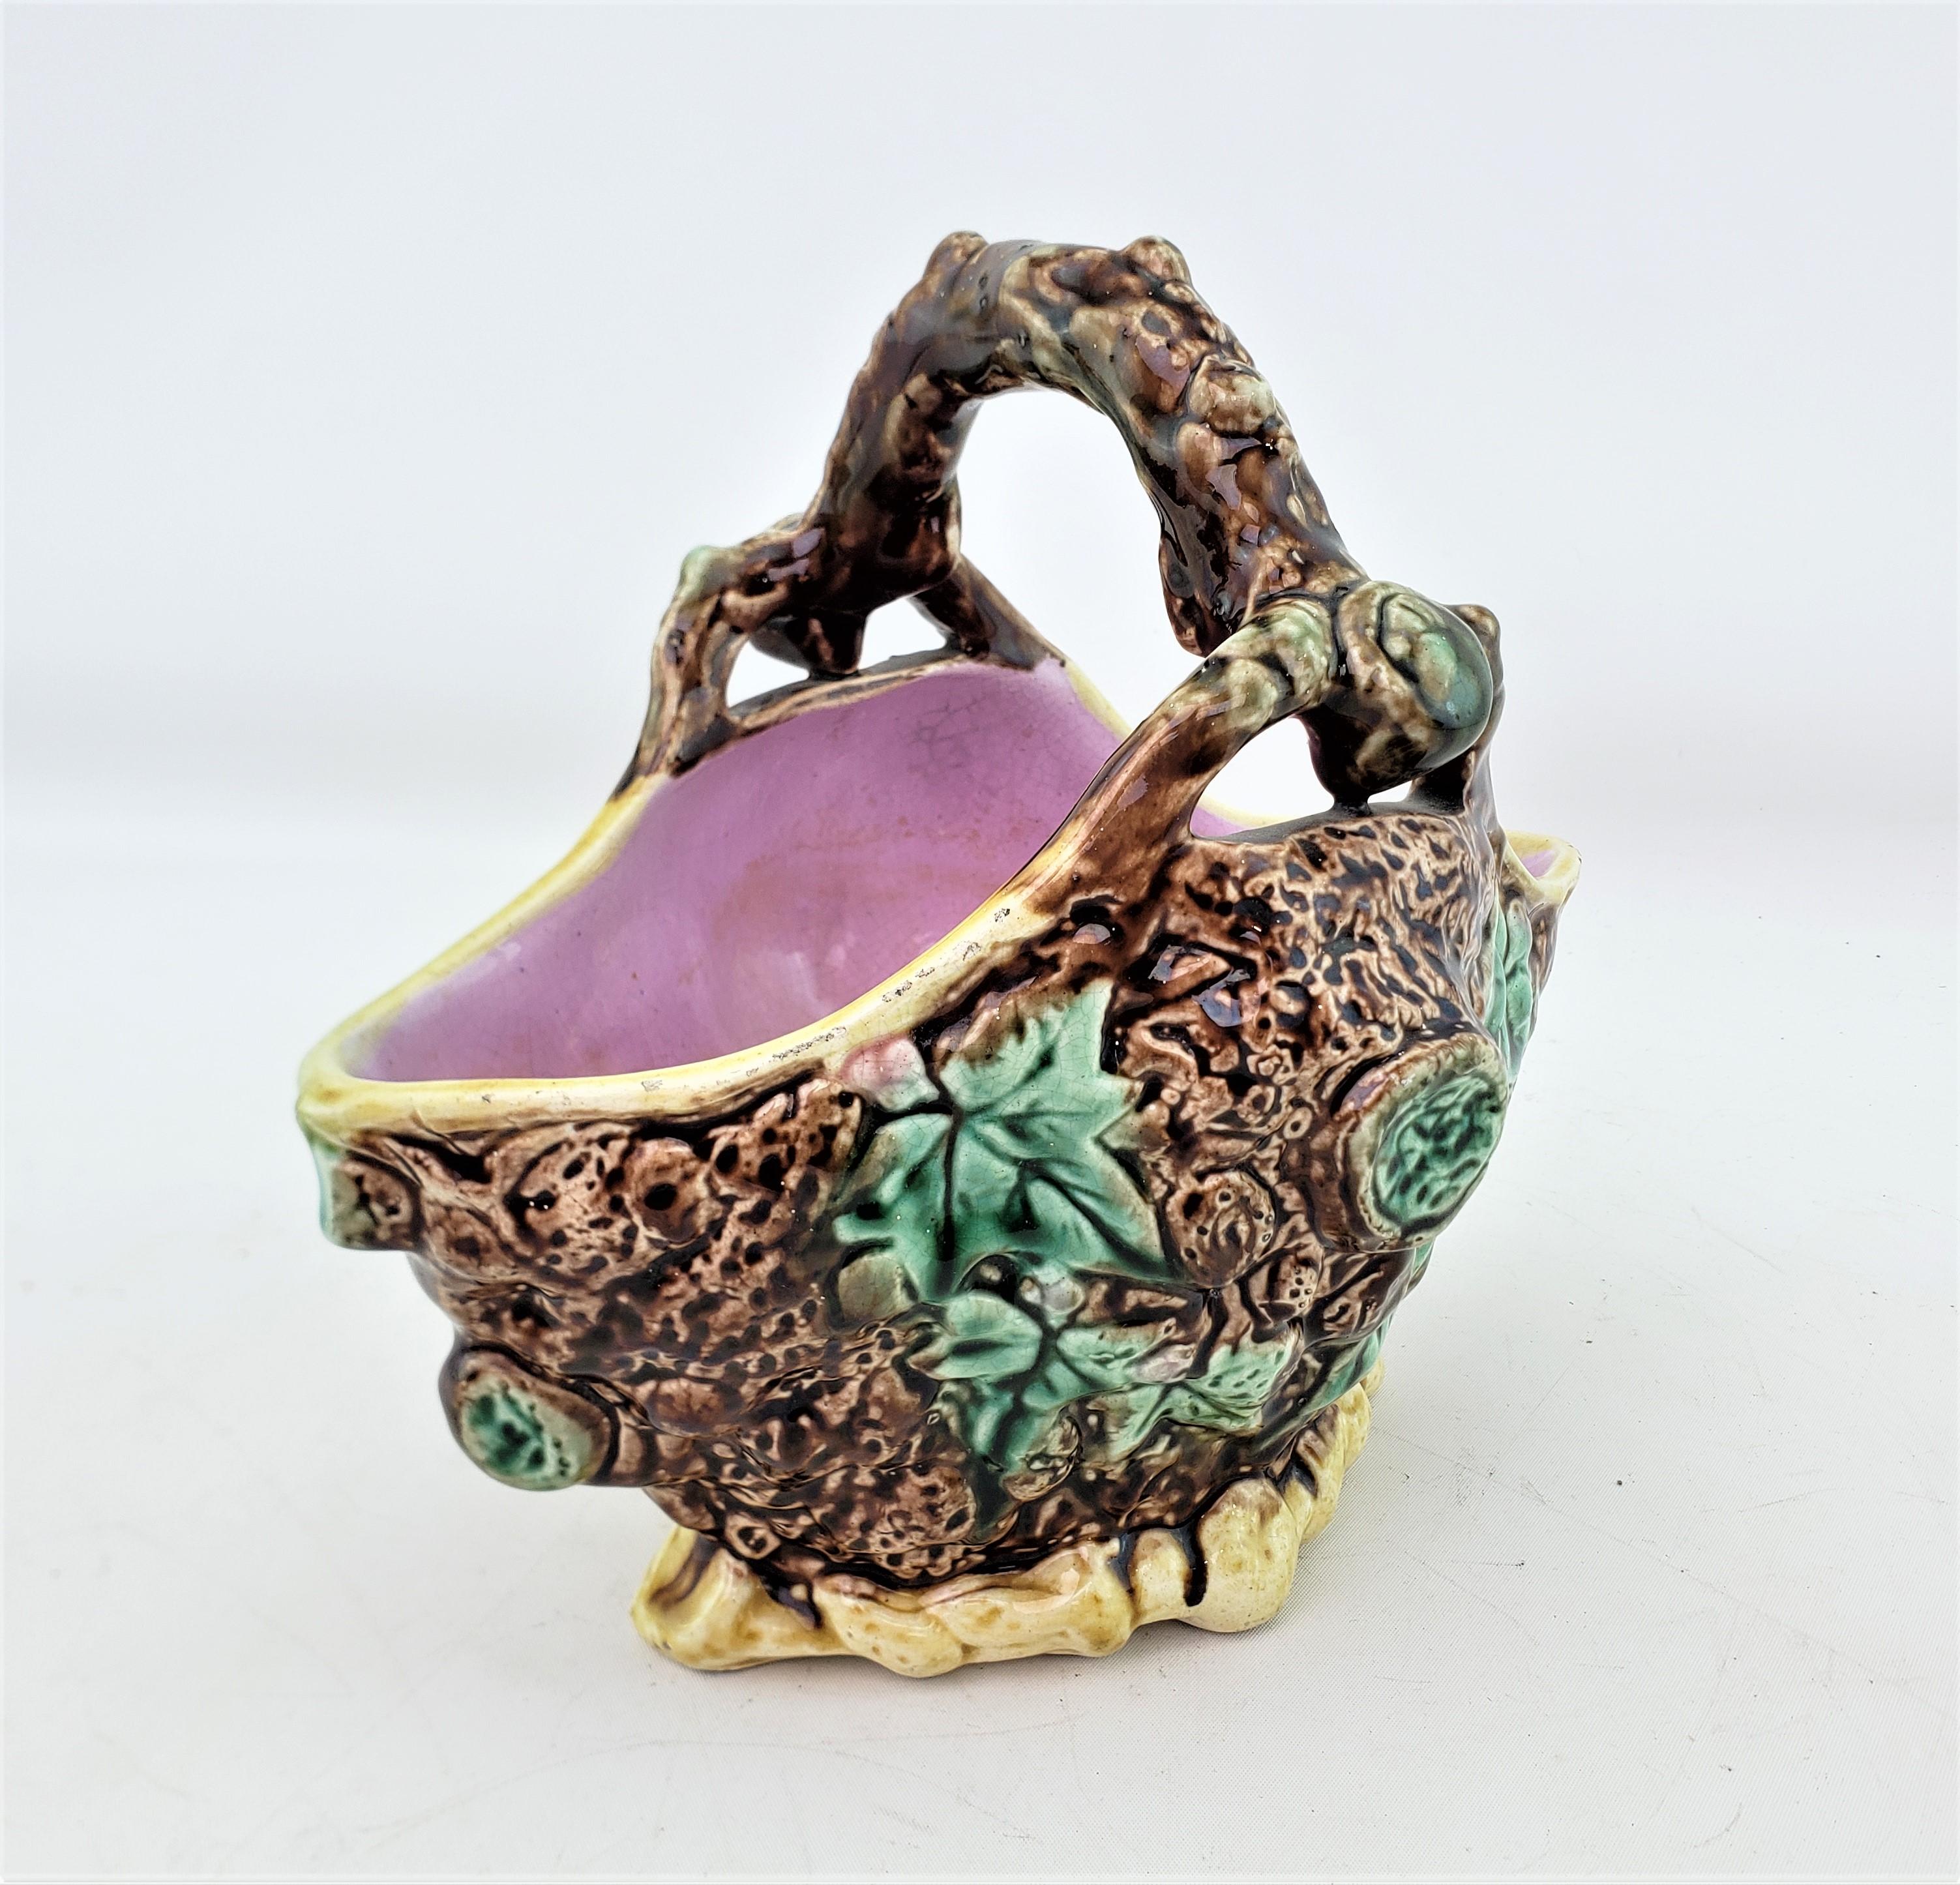 This antique planter is unsigned, but presumed to have originated from England and date to approximately 1890 and done in the period Late Victorian style. The planter is composed of Majolica and done in a figural basket shape with and brown ground